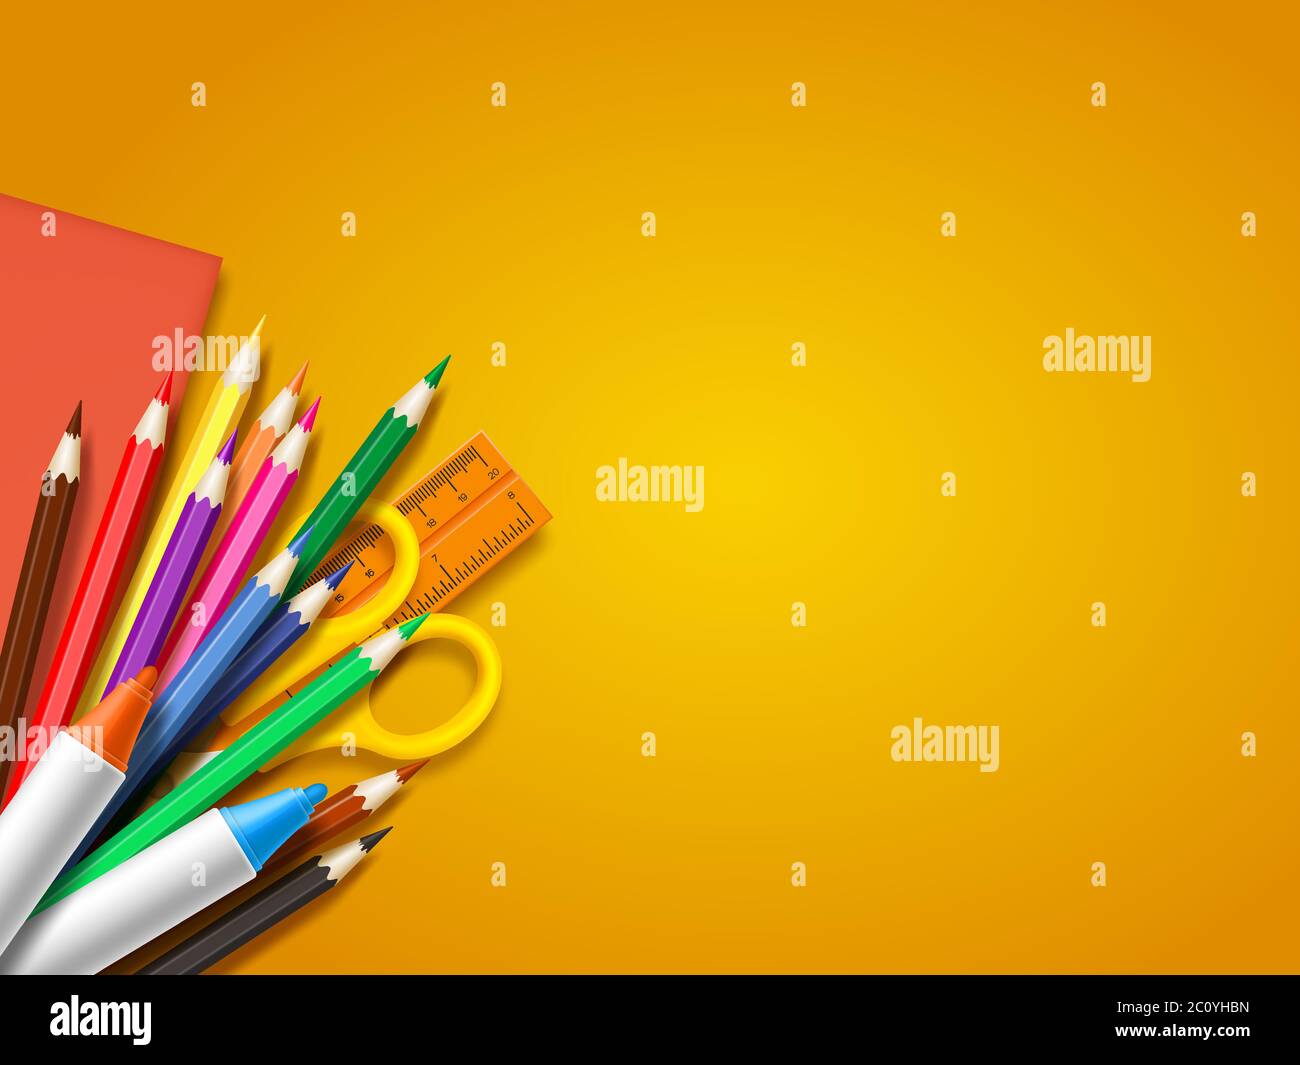 Realistic school supplies on yellow background Stock Vector